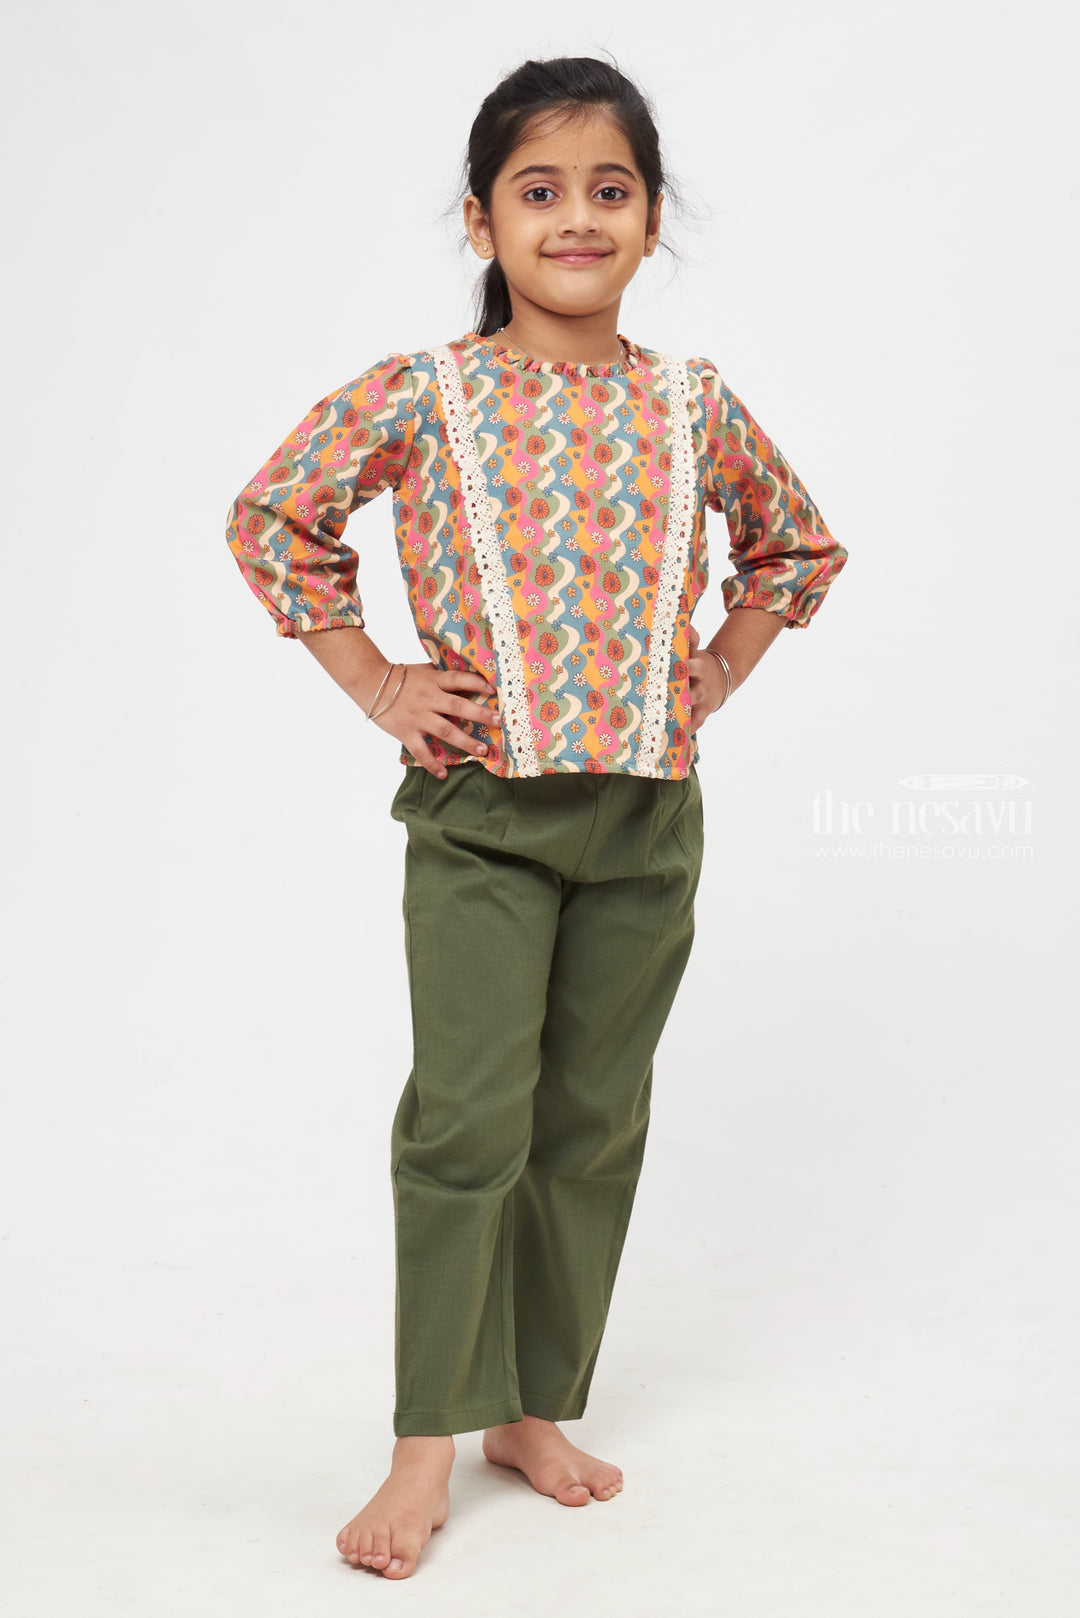 The Nesavu Girls Sharara / Plazo Set Whimsical Waves Lace-Trimmed Top with Solid Hue Trousers Set for Kids Nesavu 24 (5Y) / Green / linen cotton GPS213A-24 Kids Vibrant Vignettes Collection | Stylish Sprouts Essentials | The Nesavu